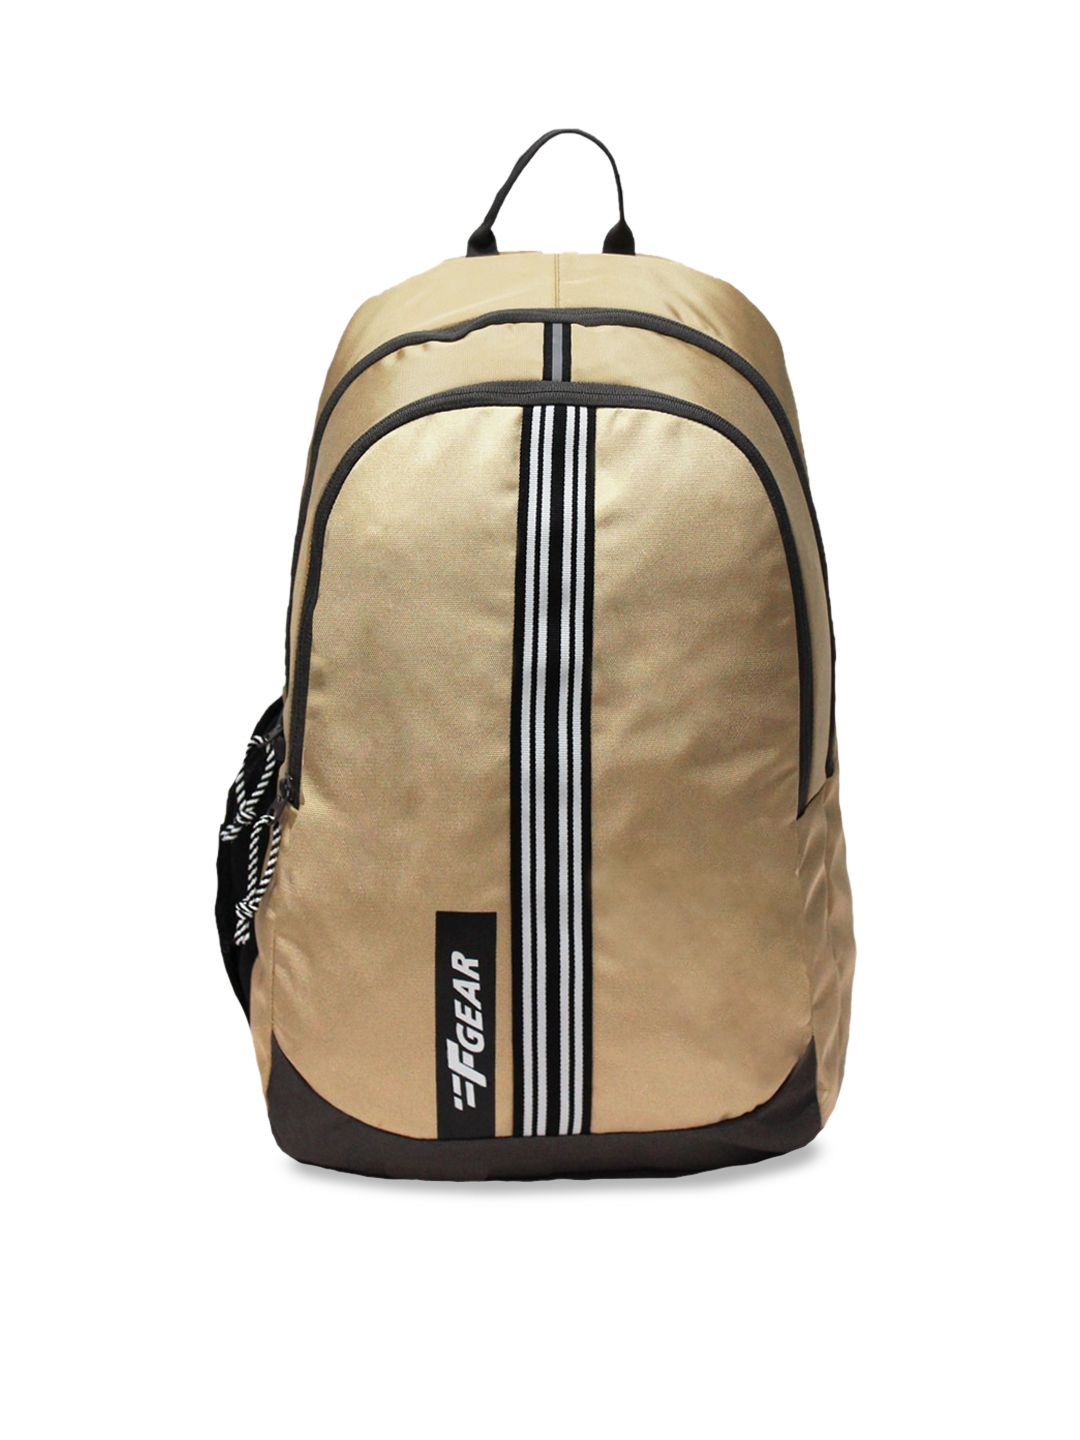 F Gear Unisex Cream-coloured & Black Contrast Detail Backpack Price in India